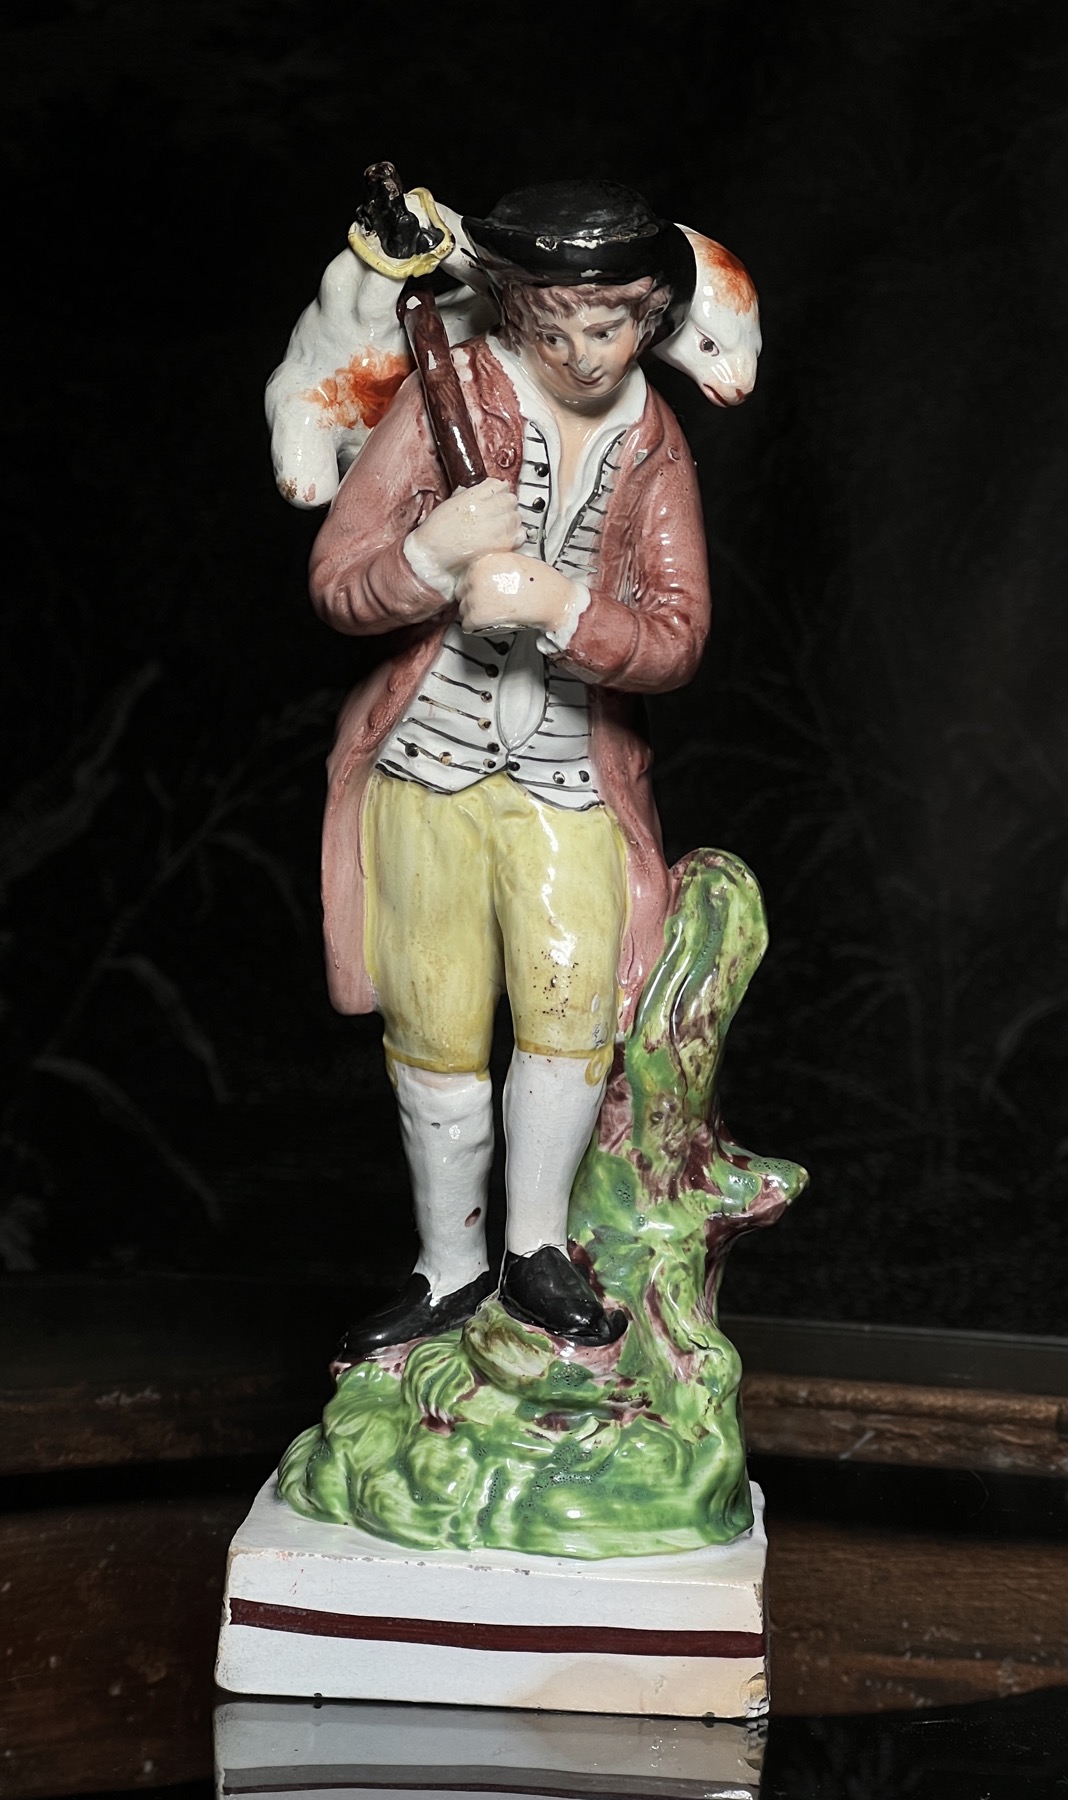 The Lost Sheep Returns, Woods Staffordshire figure c. 1790